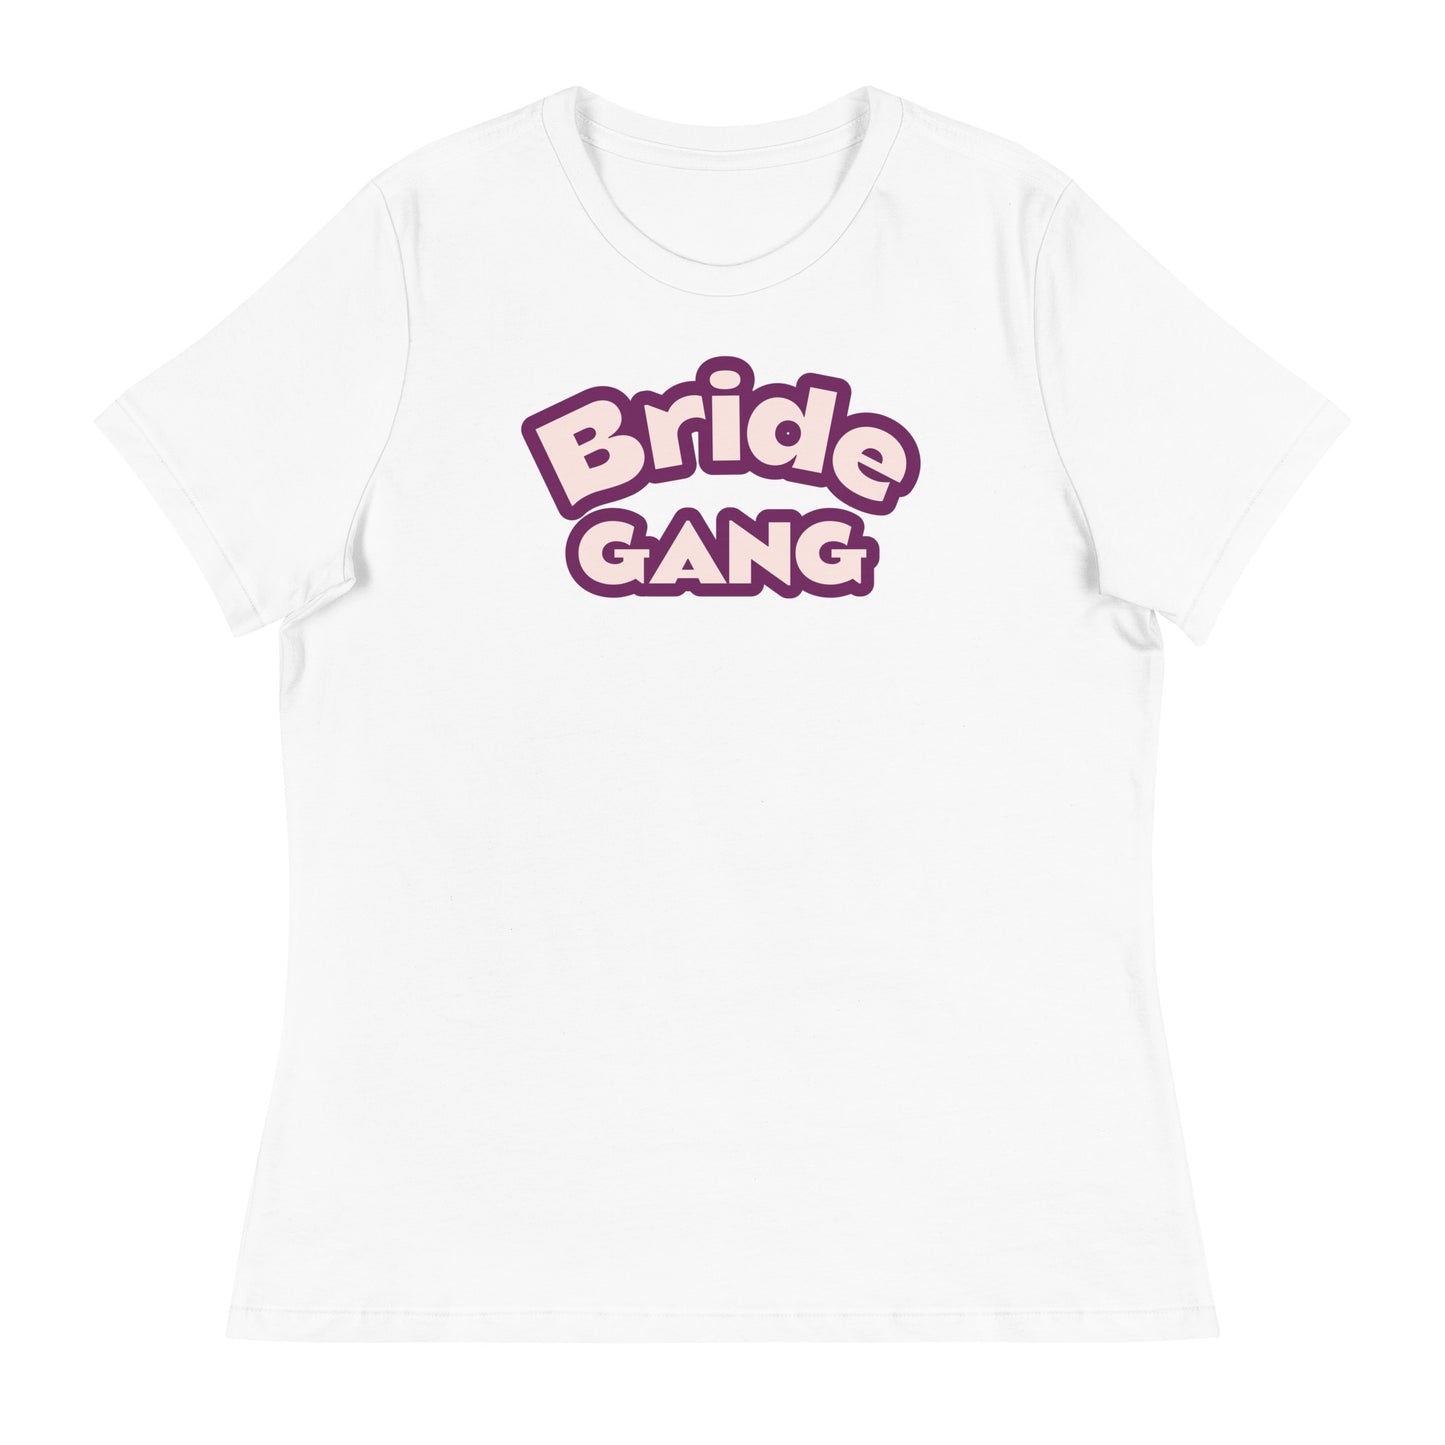 Women's Relaxed T-Shirt | Graphic Tee | Bride Gang